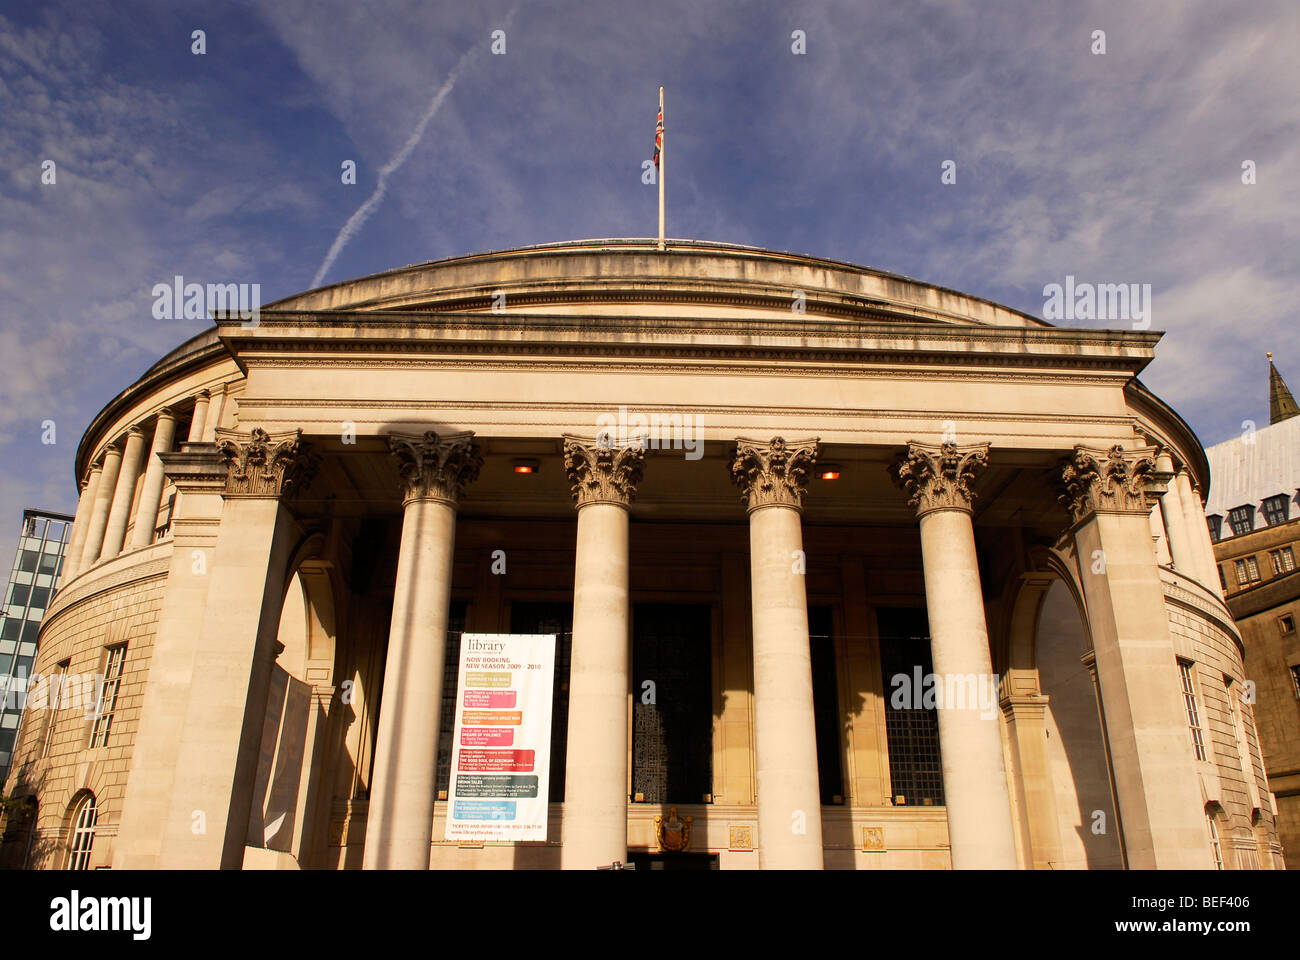 Fassade des Manchester Central Library, Manchester, North West England. Stockfoto